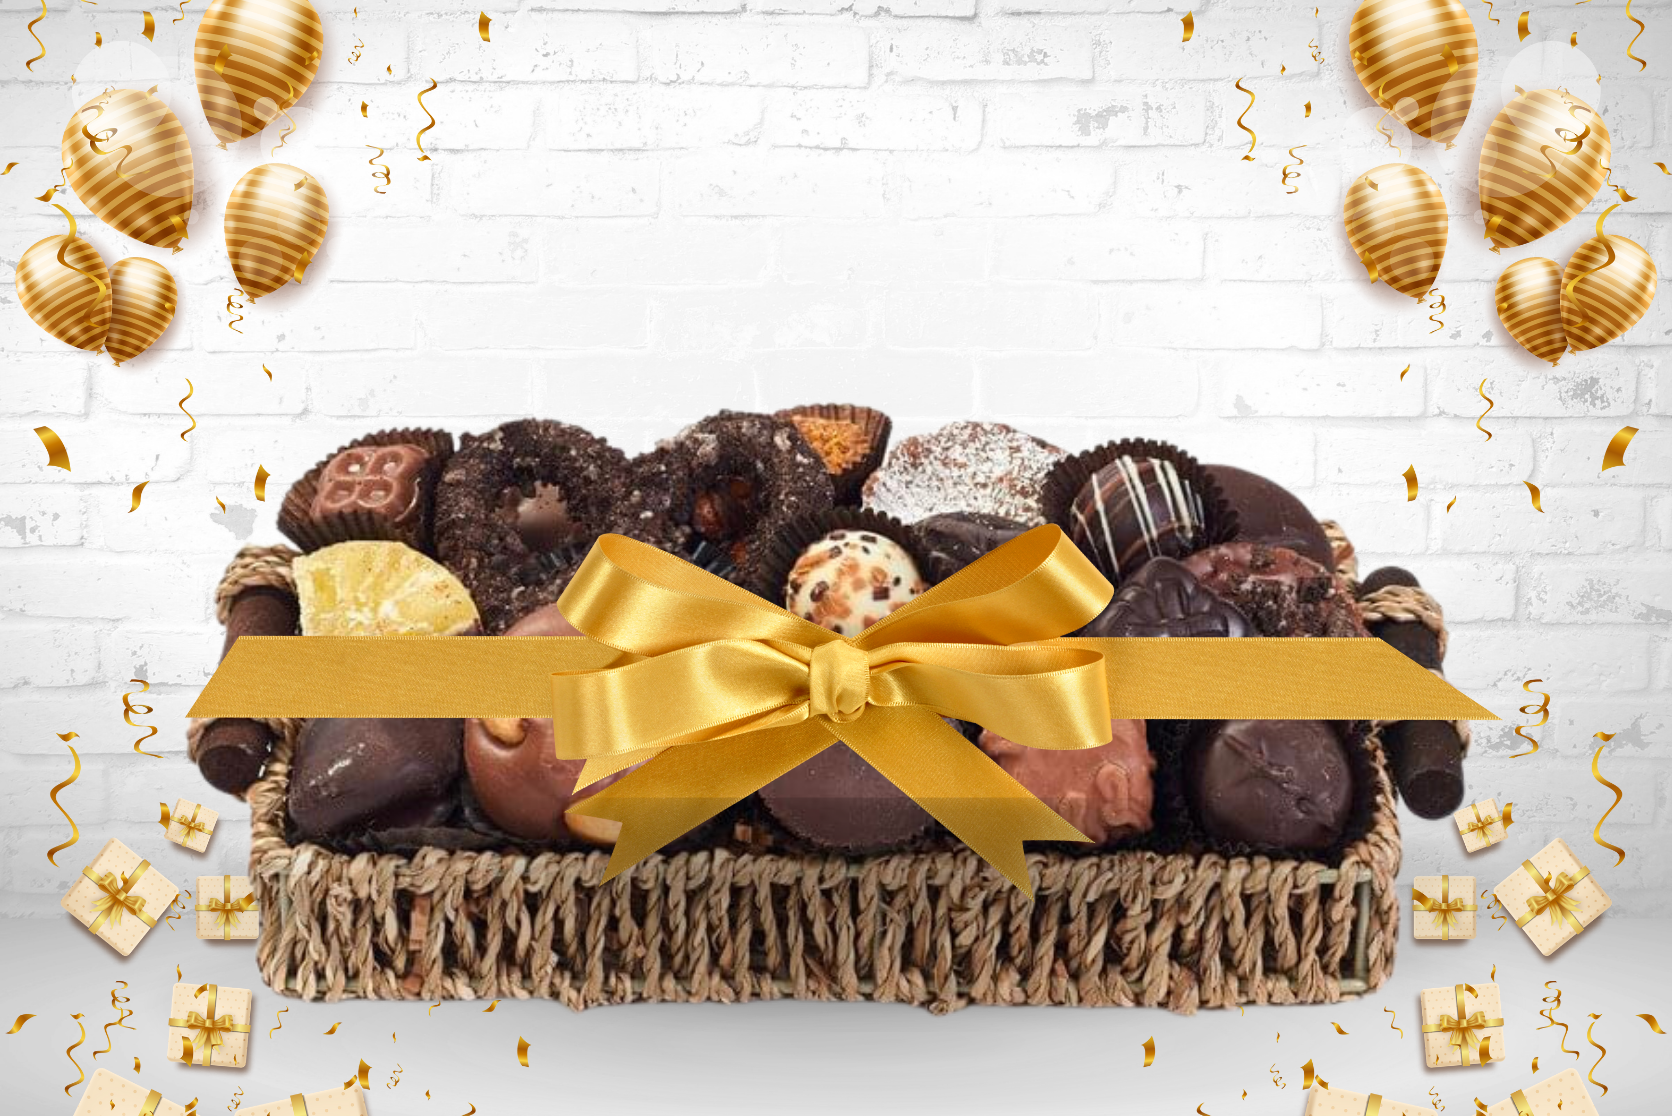 Amazon.com : A Gift Inside Holiday Classic Chocolate, Candy & Crunch Gift  Basket With Handmade Chocolates, Ghirardelli, Caramel Corn for Gourmet  Christmas Food Gift : Gourmet Fruit Gifts : Everything Else